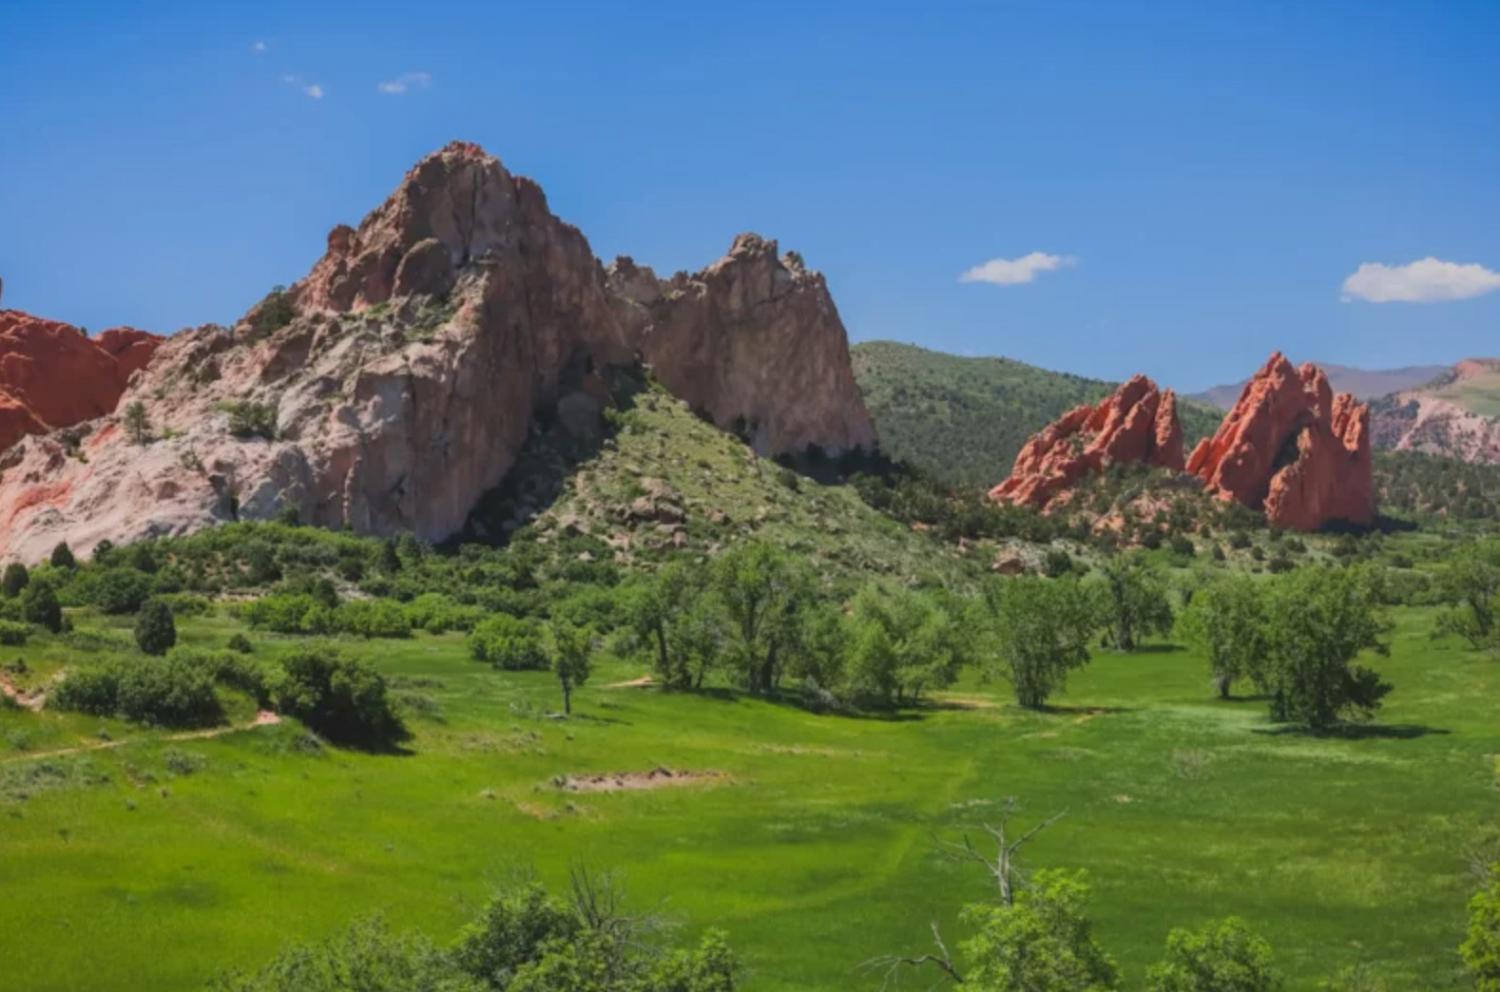 Halloween Hike in Garden of the Gods
Mon Oct 31, 4:00 PM - Mon Oct 31, 6:00 PM
in 12 days